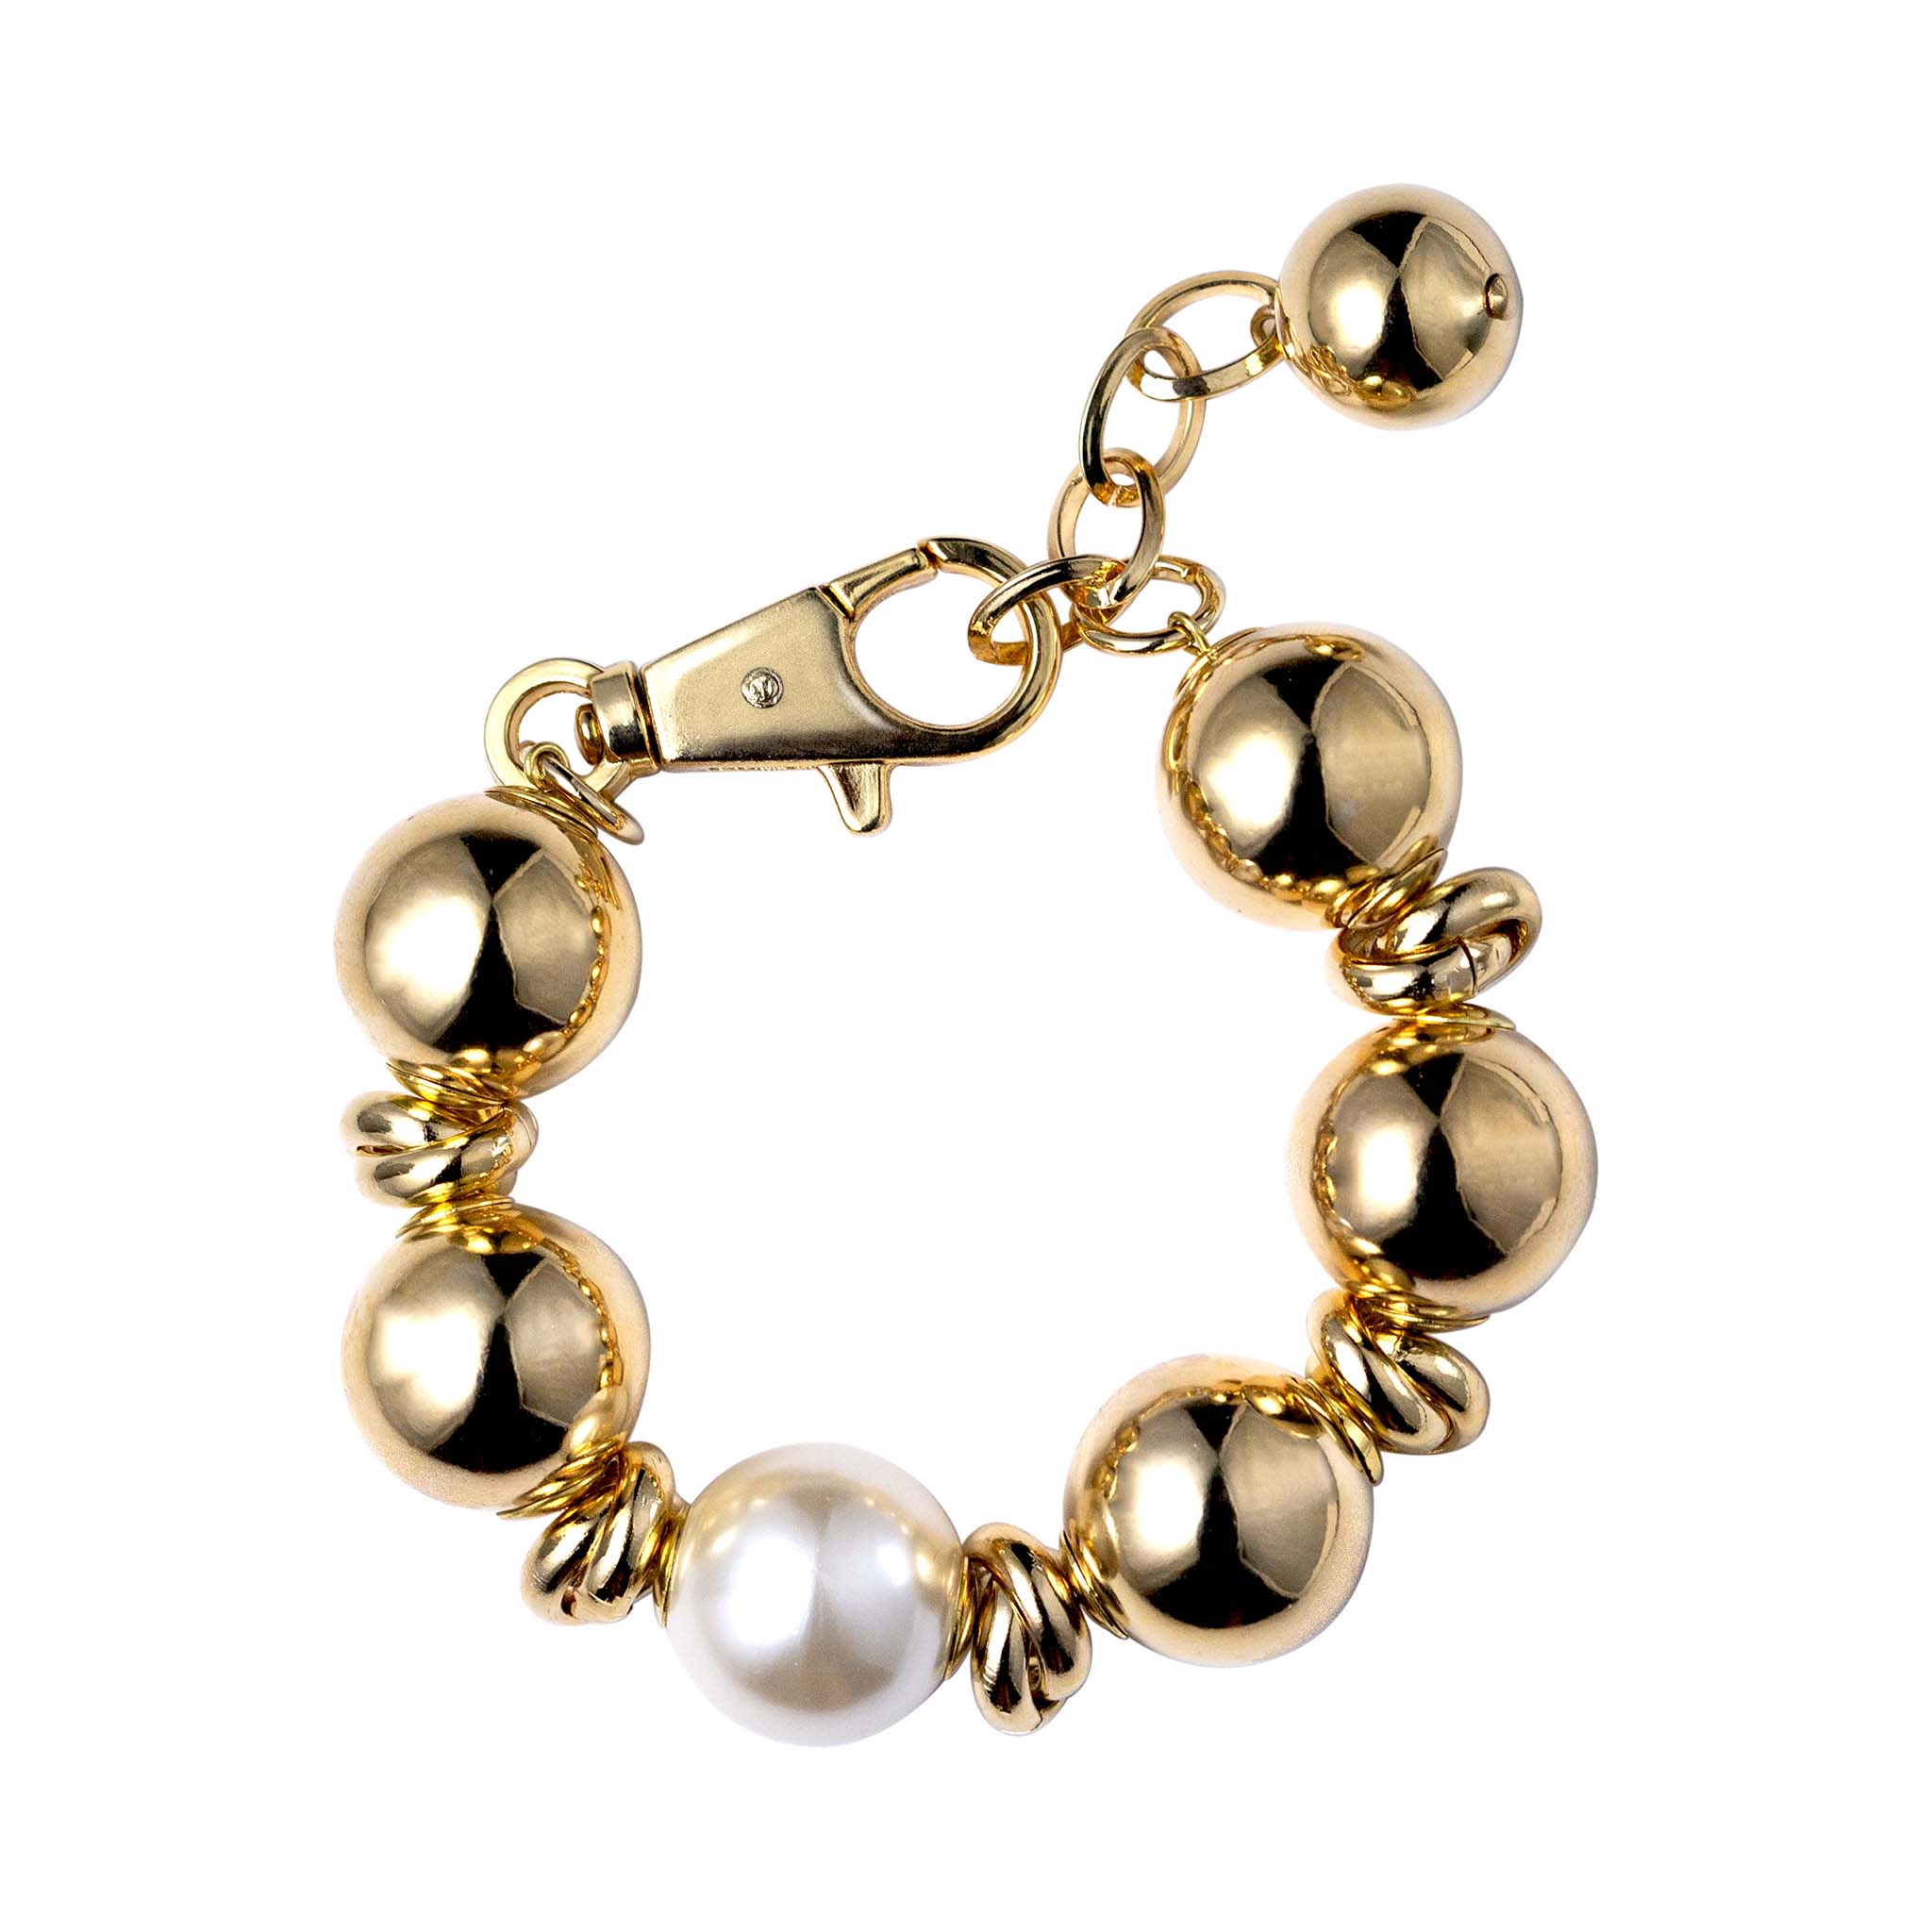 Sheltered spheres bracelet with pearls